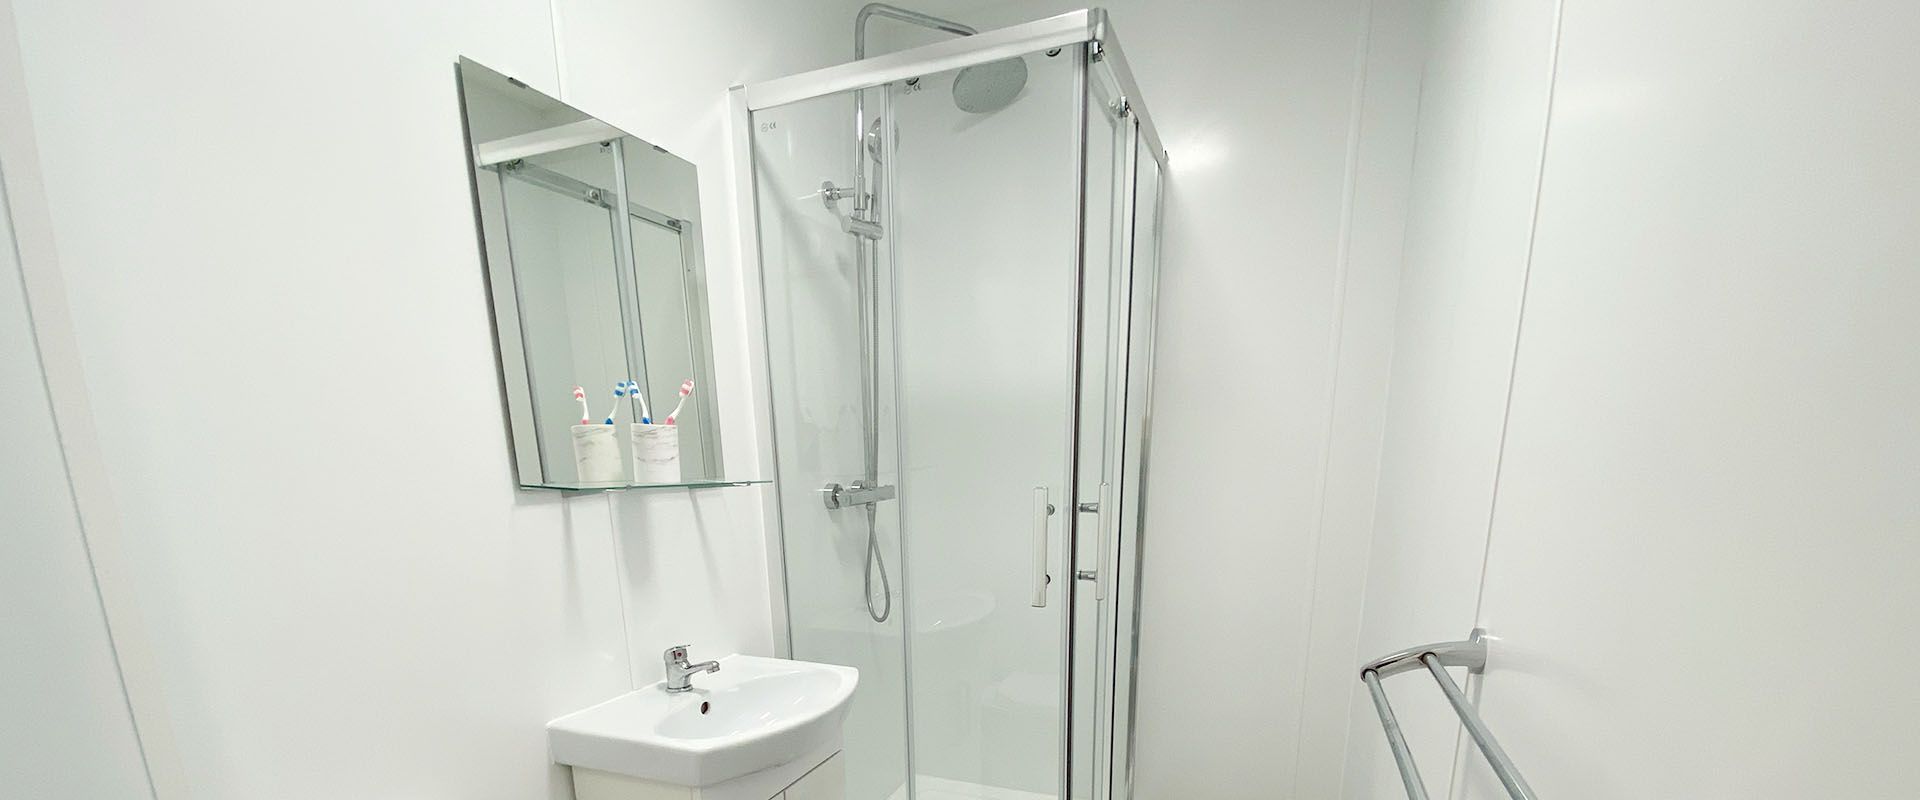 Live in luxury with our waterfall showers